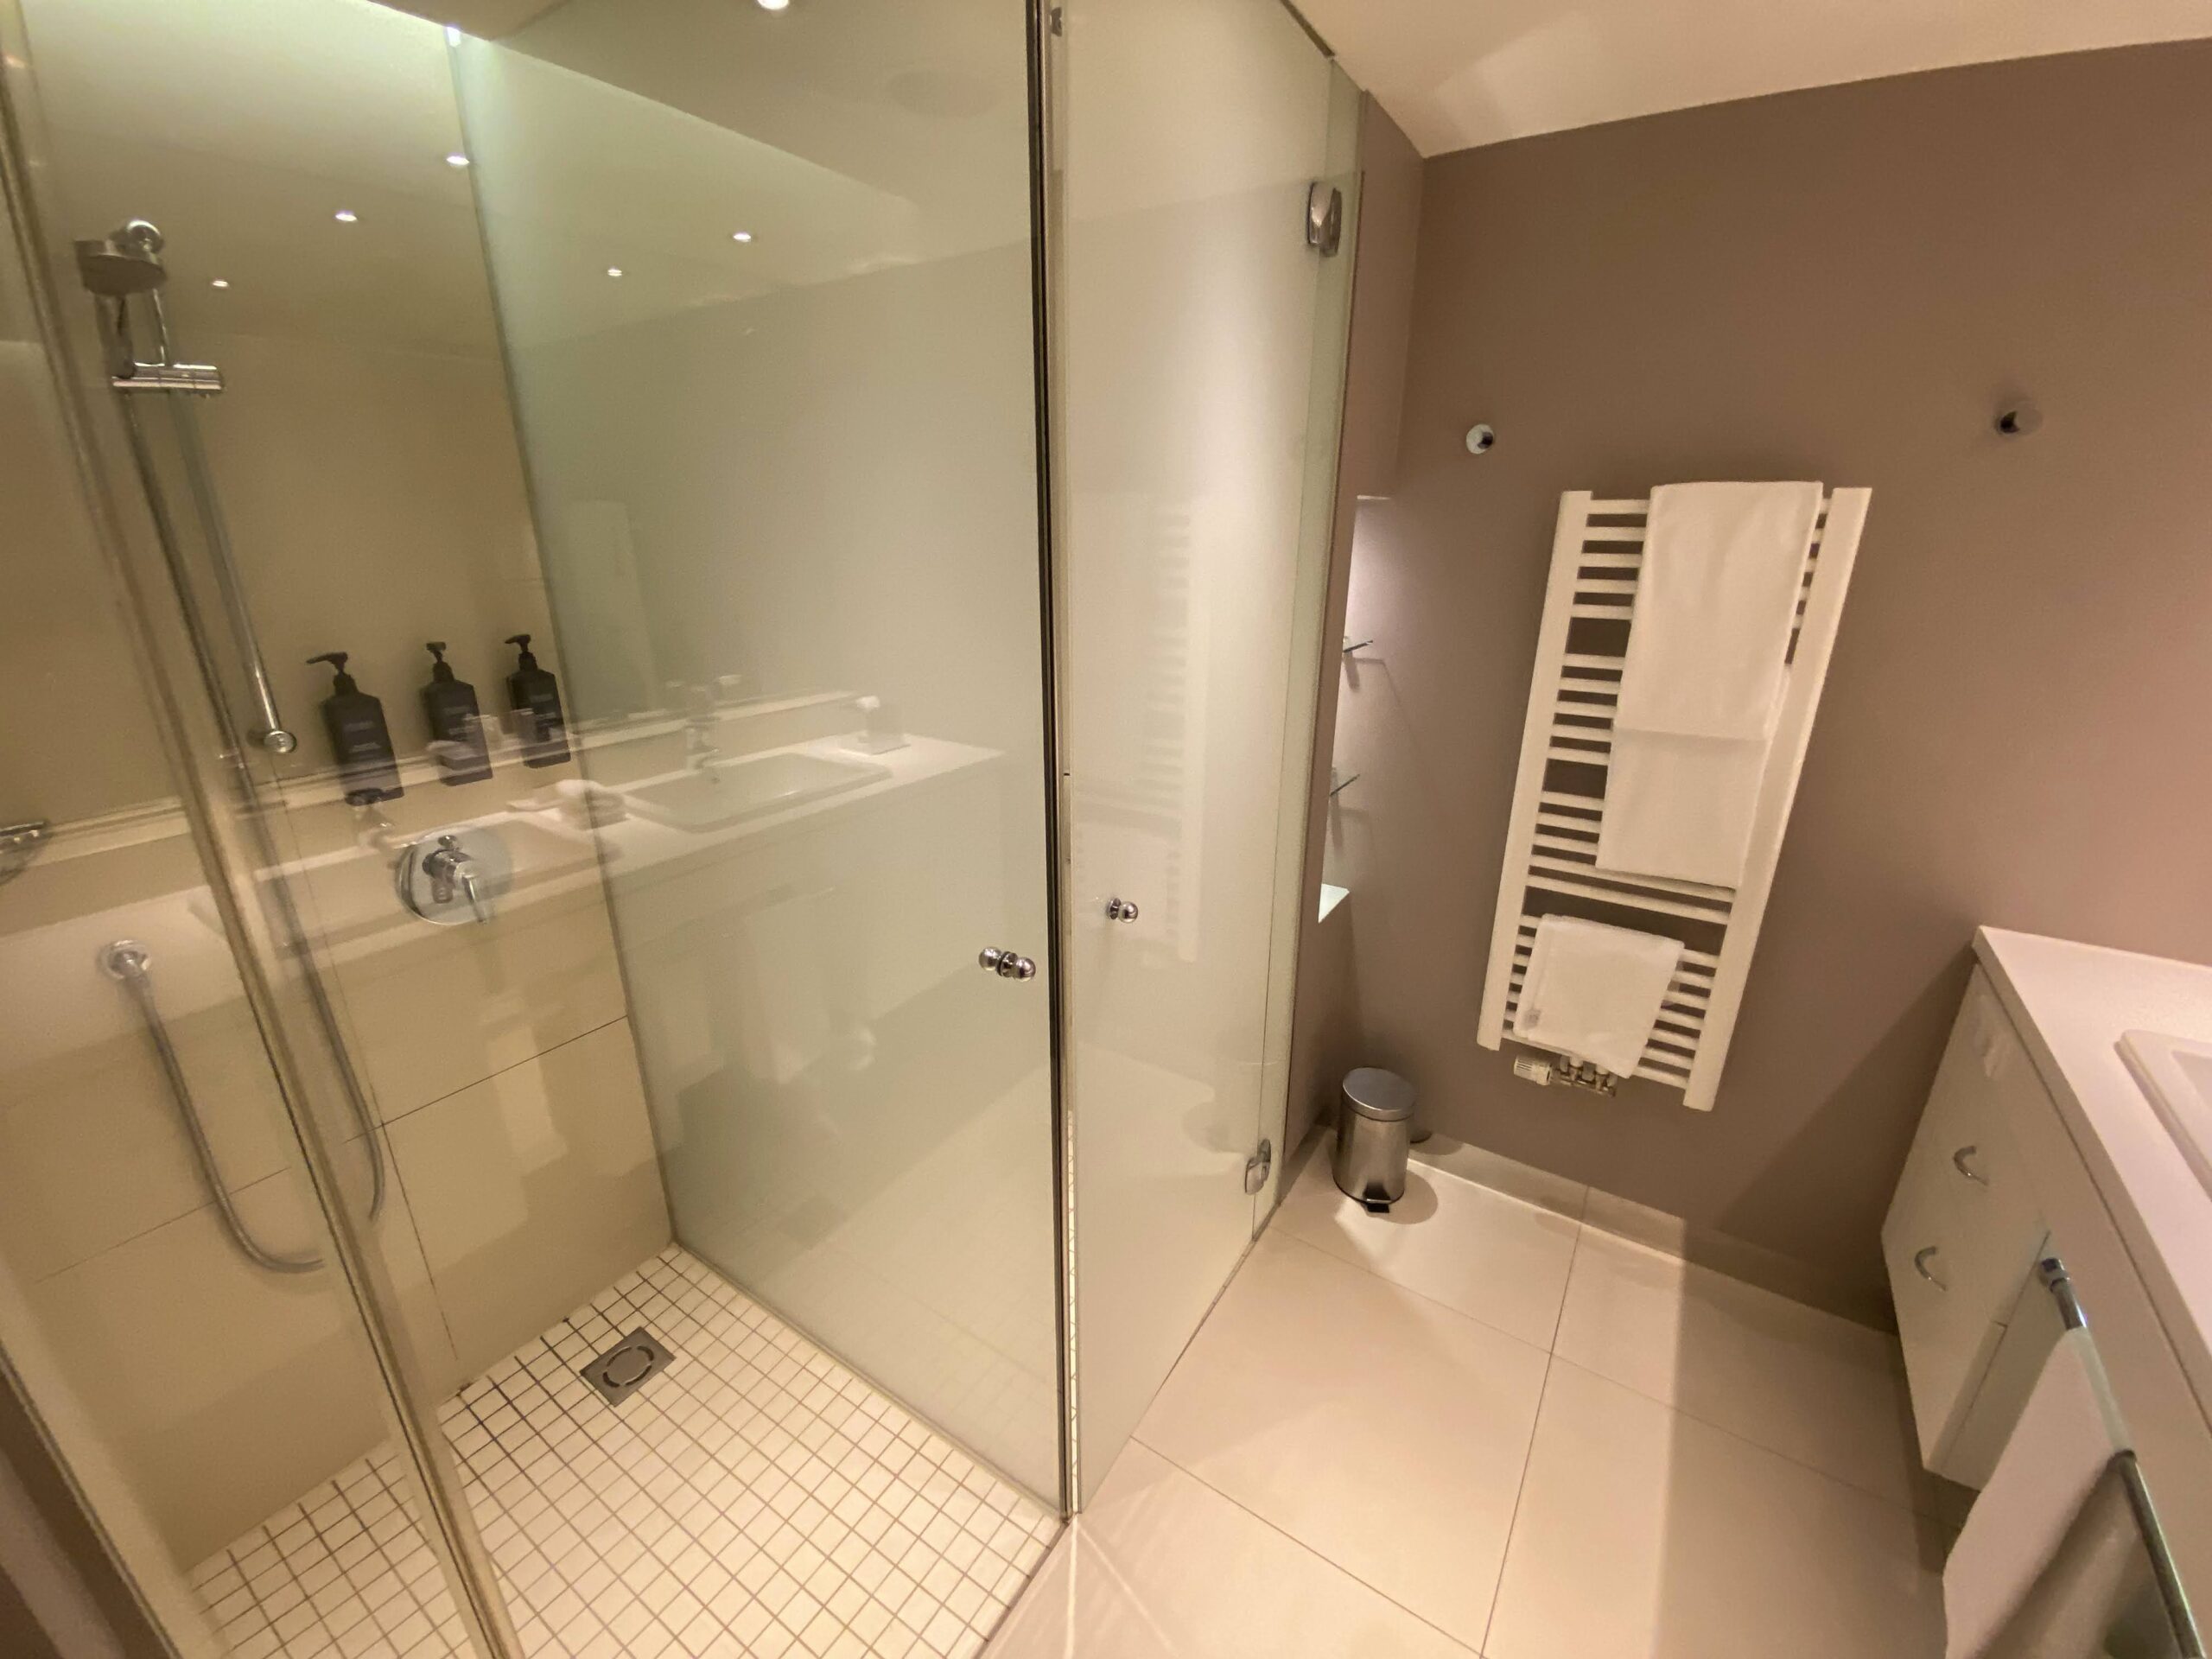 a bathroom with glass shower and white tile floor